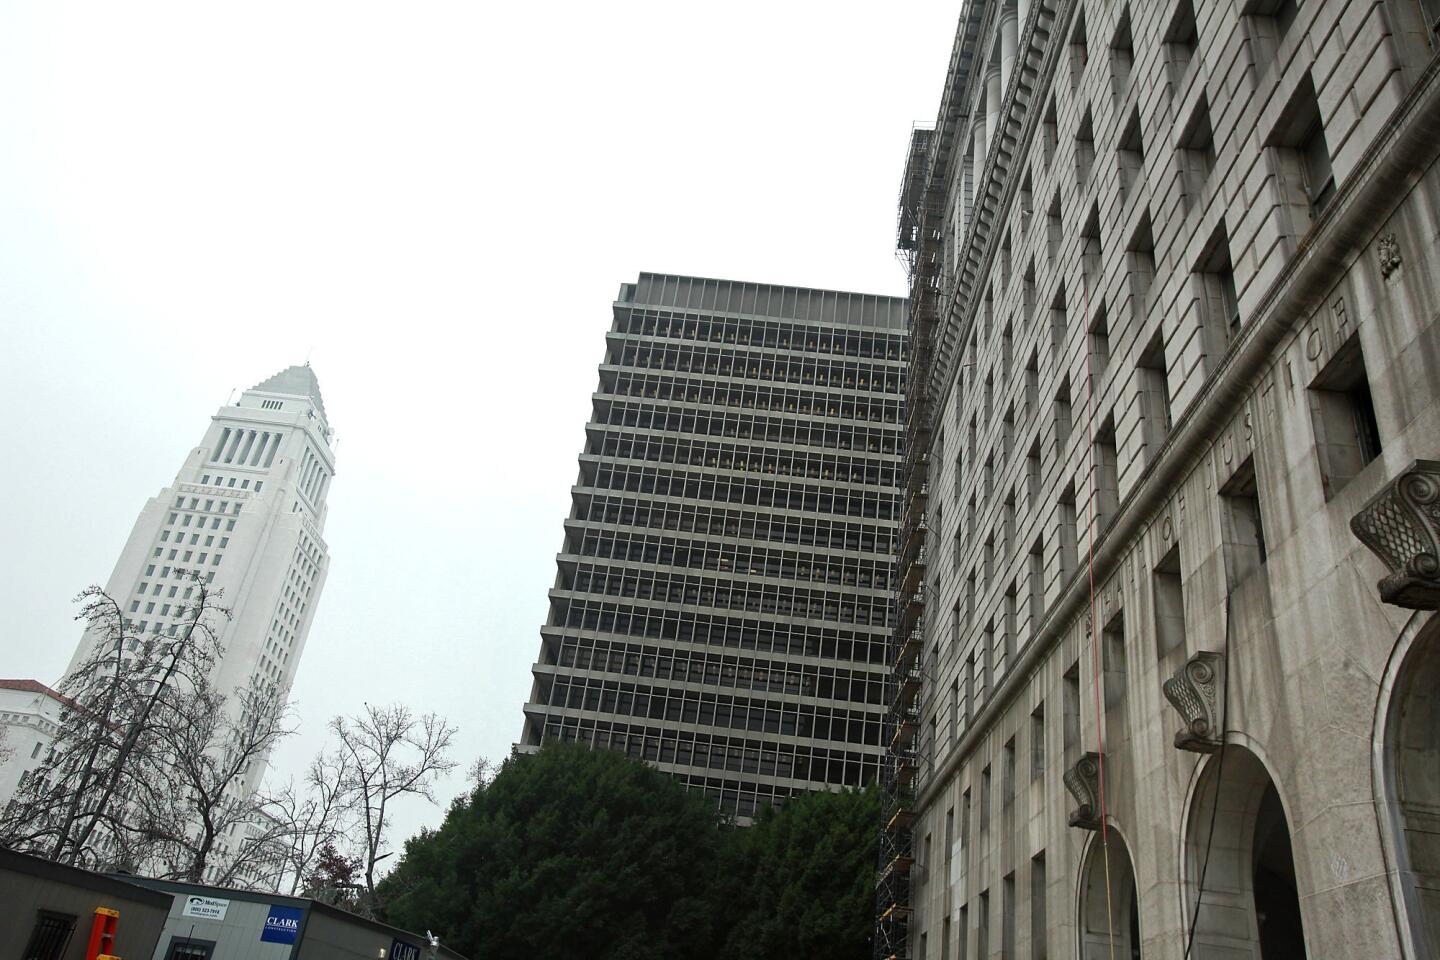 The facade of the County Hall of Justice, right, is dark and dirty compared with that of Los Angeles City Hall, left. The material of both buildings is Sierra white granite, quarried near Fresno. The exterior of the Hall of Justice will soon be cleaned and restored.